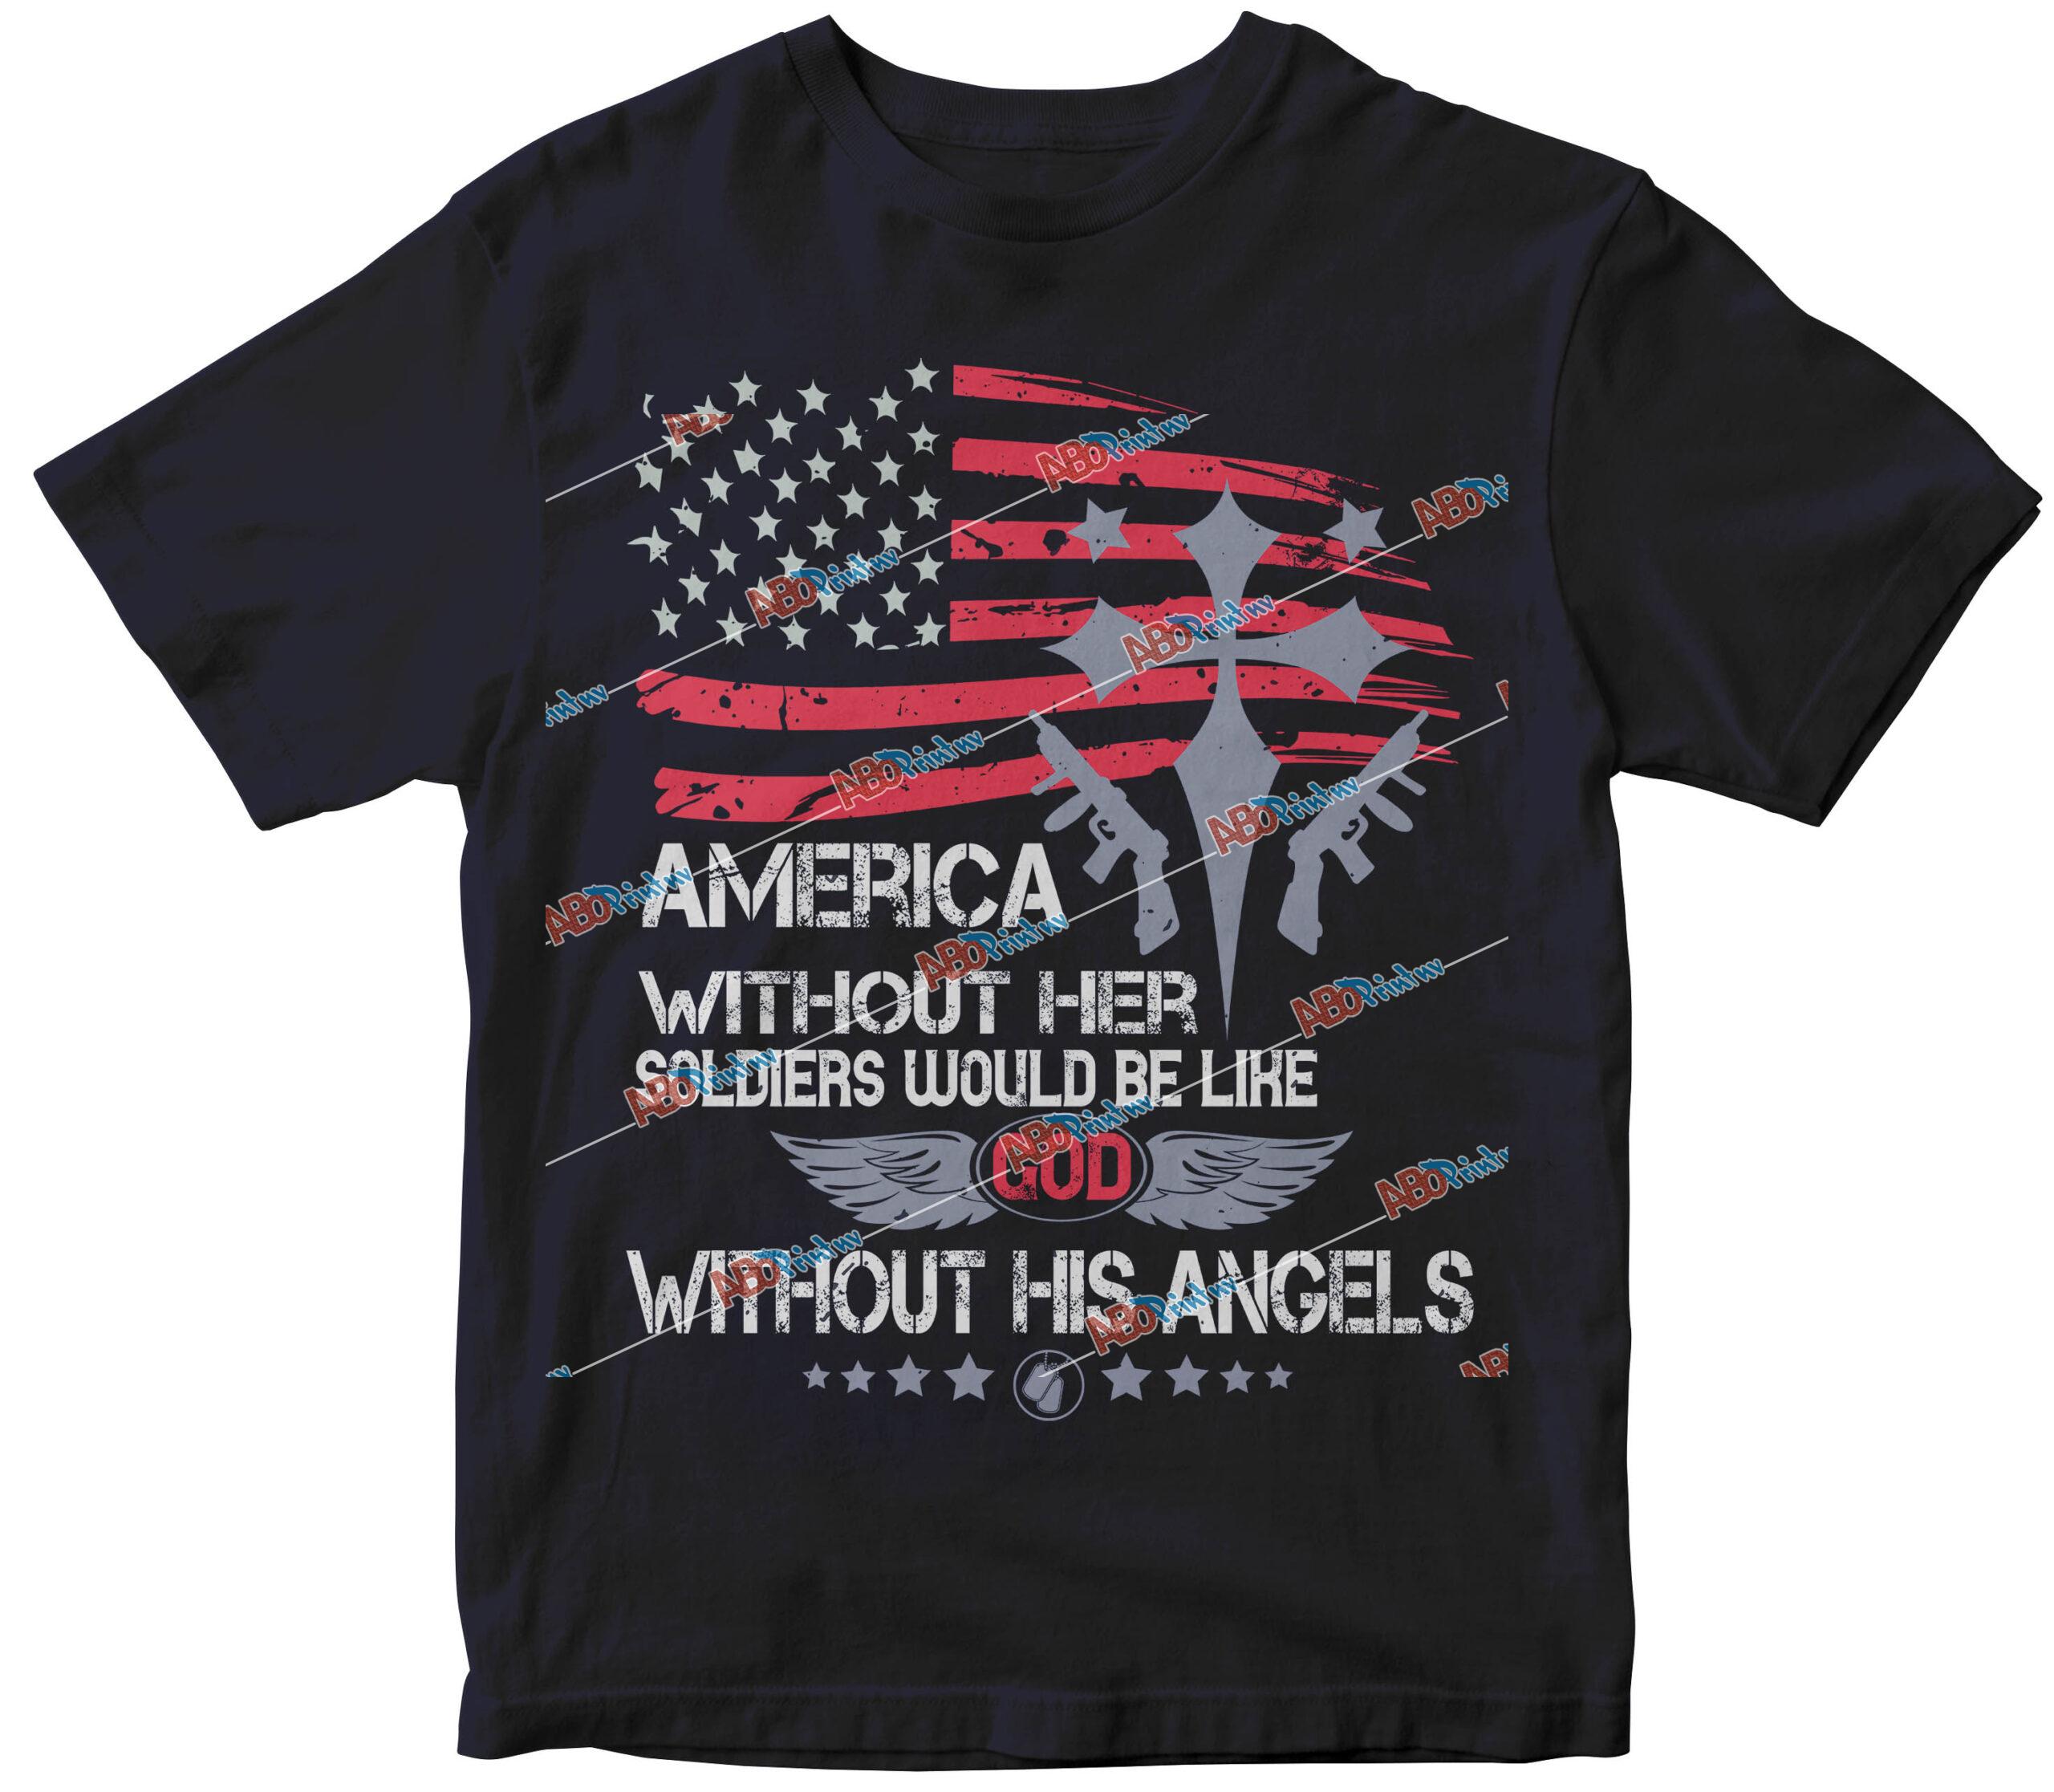 America without her Soldiers would be like God without His angels.jpg